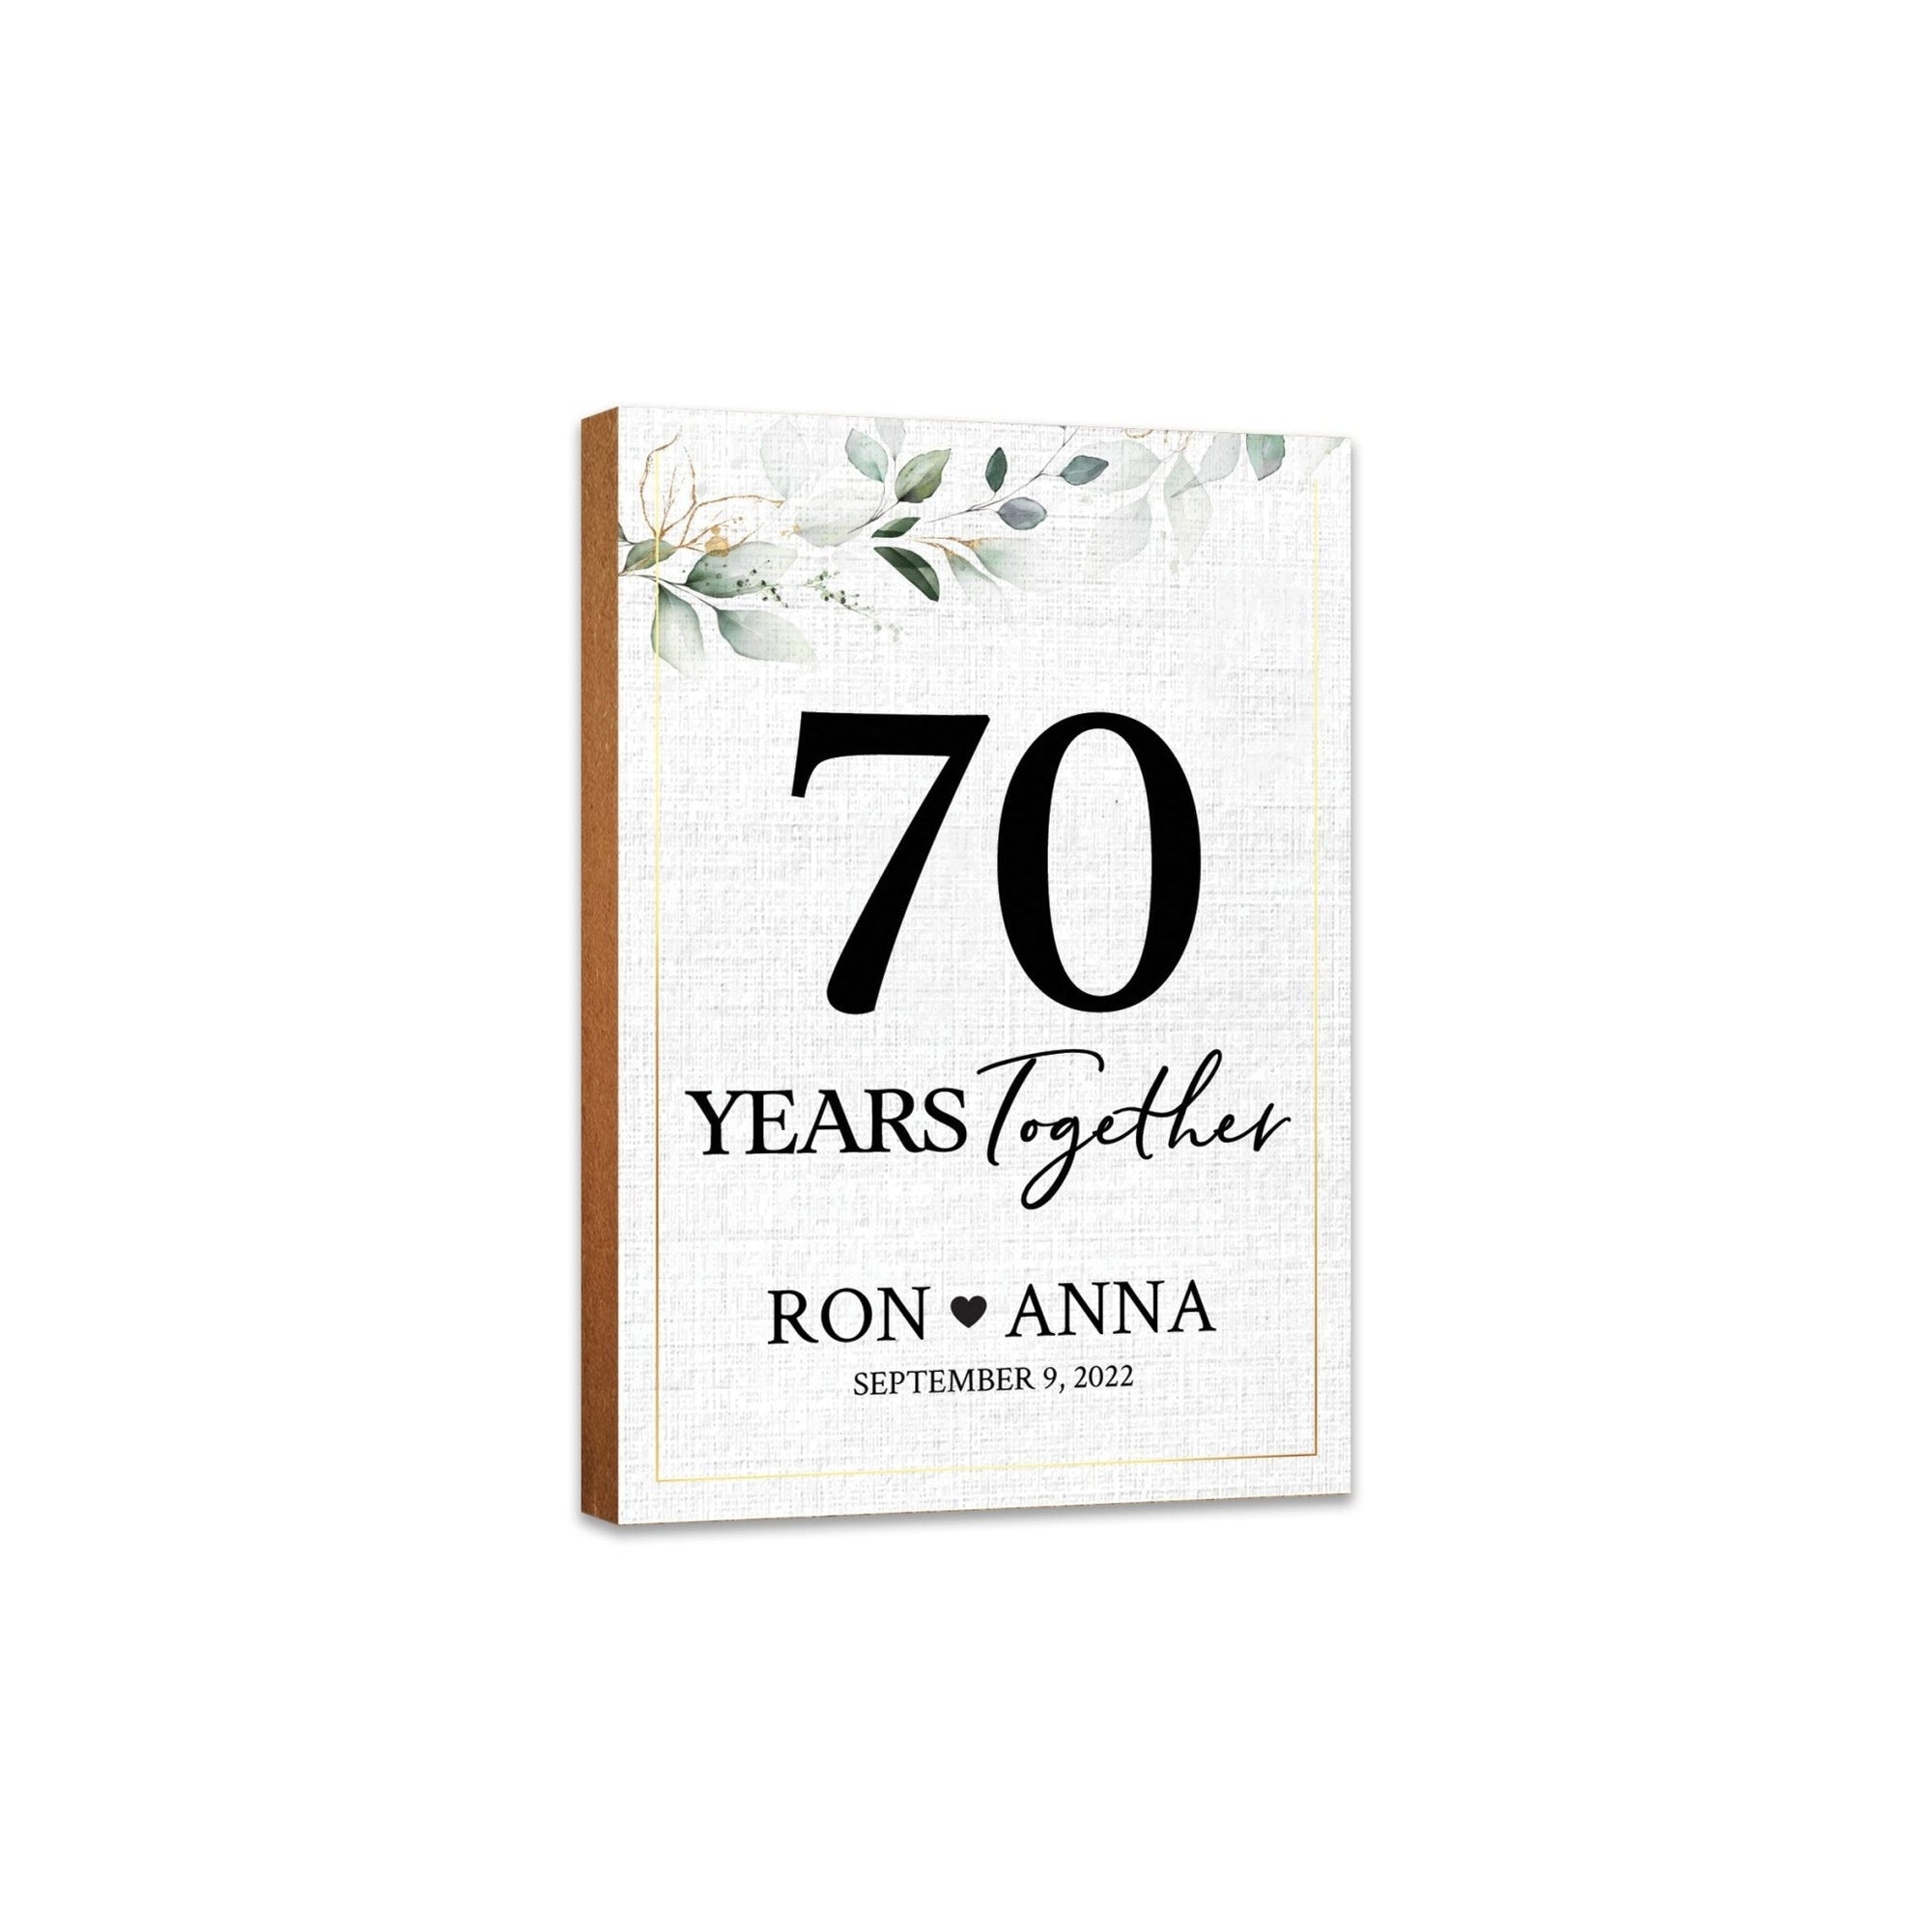 Personalized Unique Shelf Décor and Tabletop Signs Gifts for 70th Wedding Anniversary - LifeSong Milestones